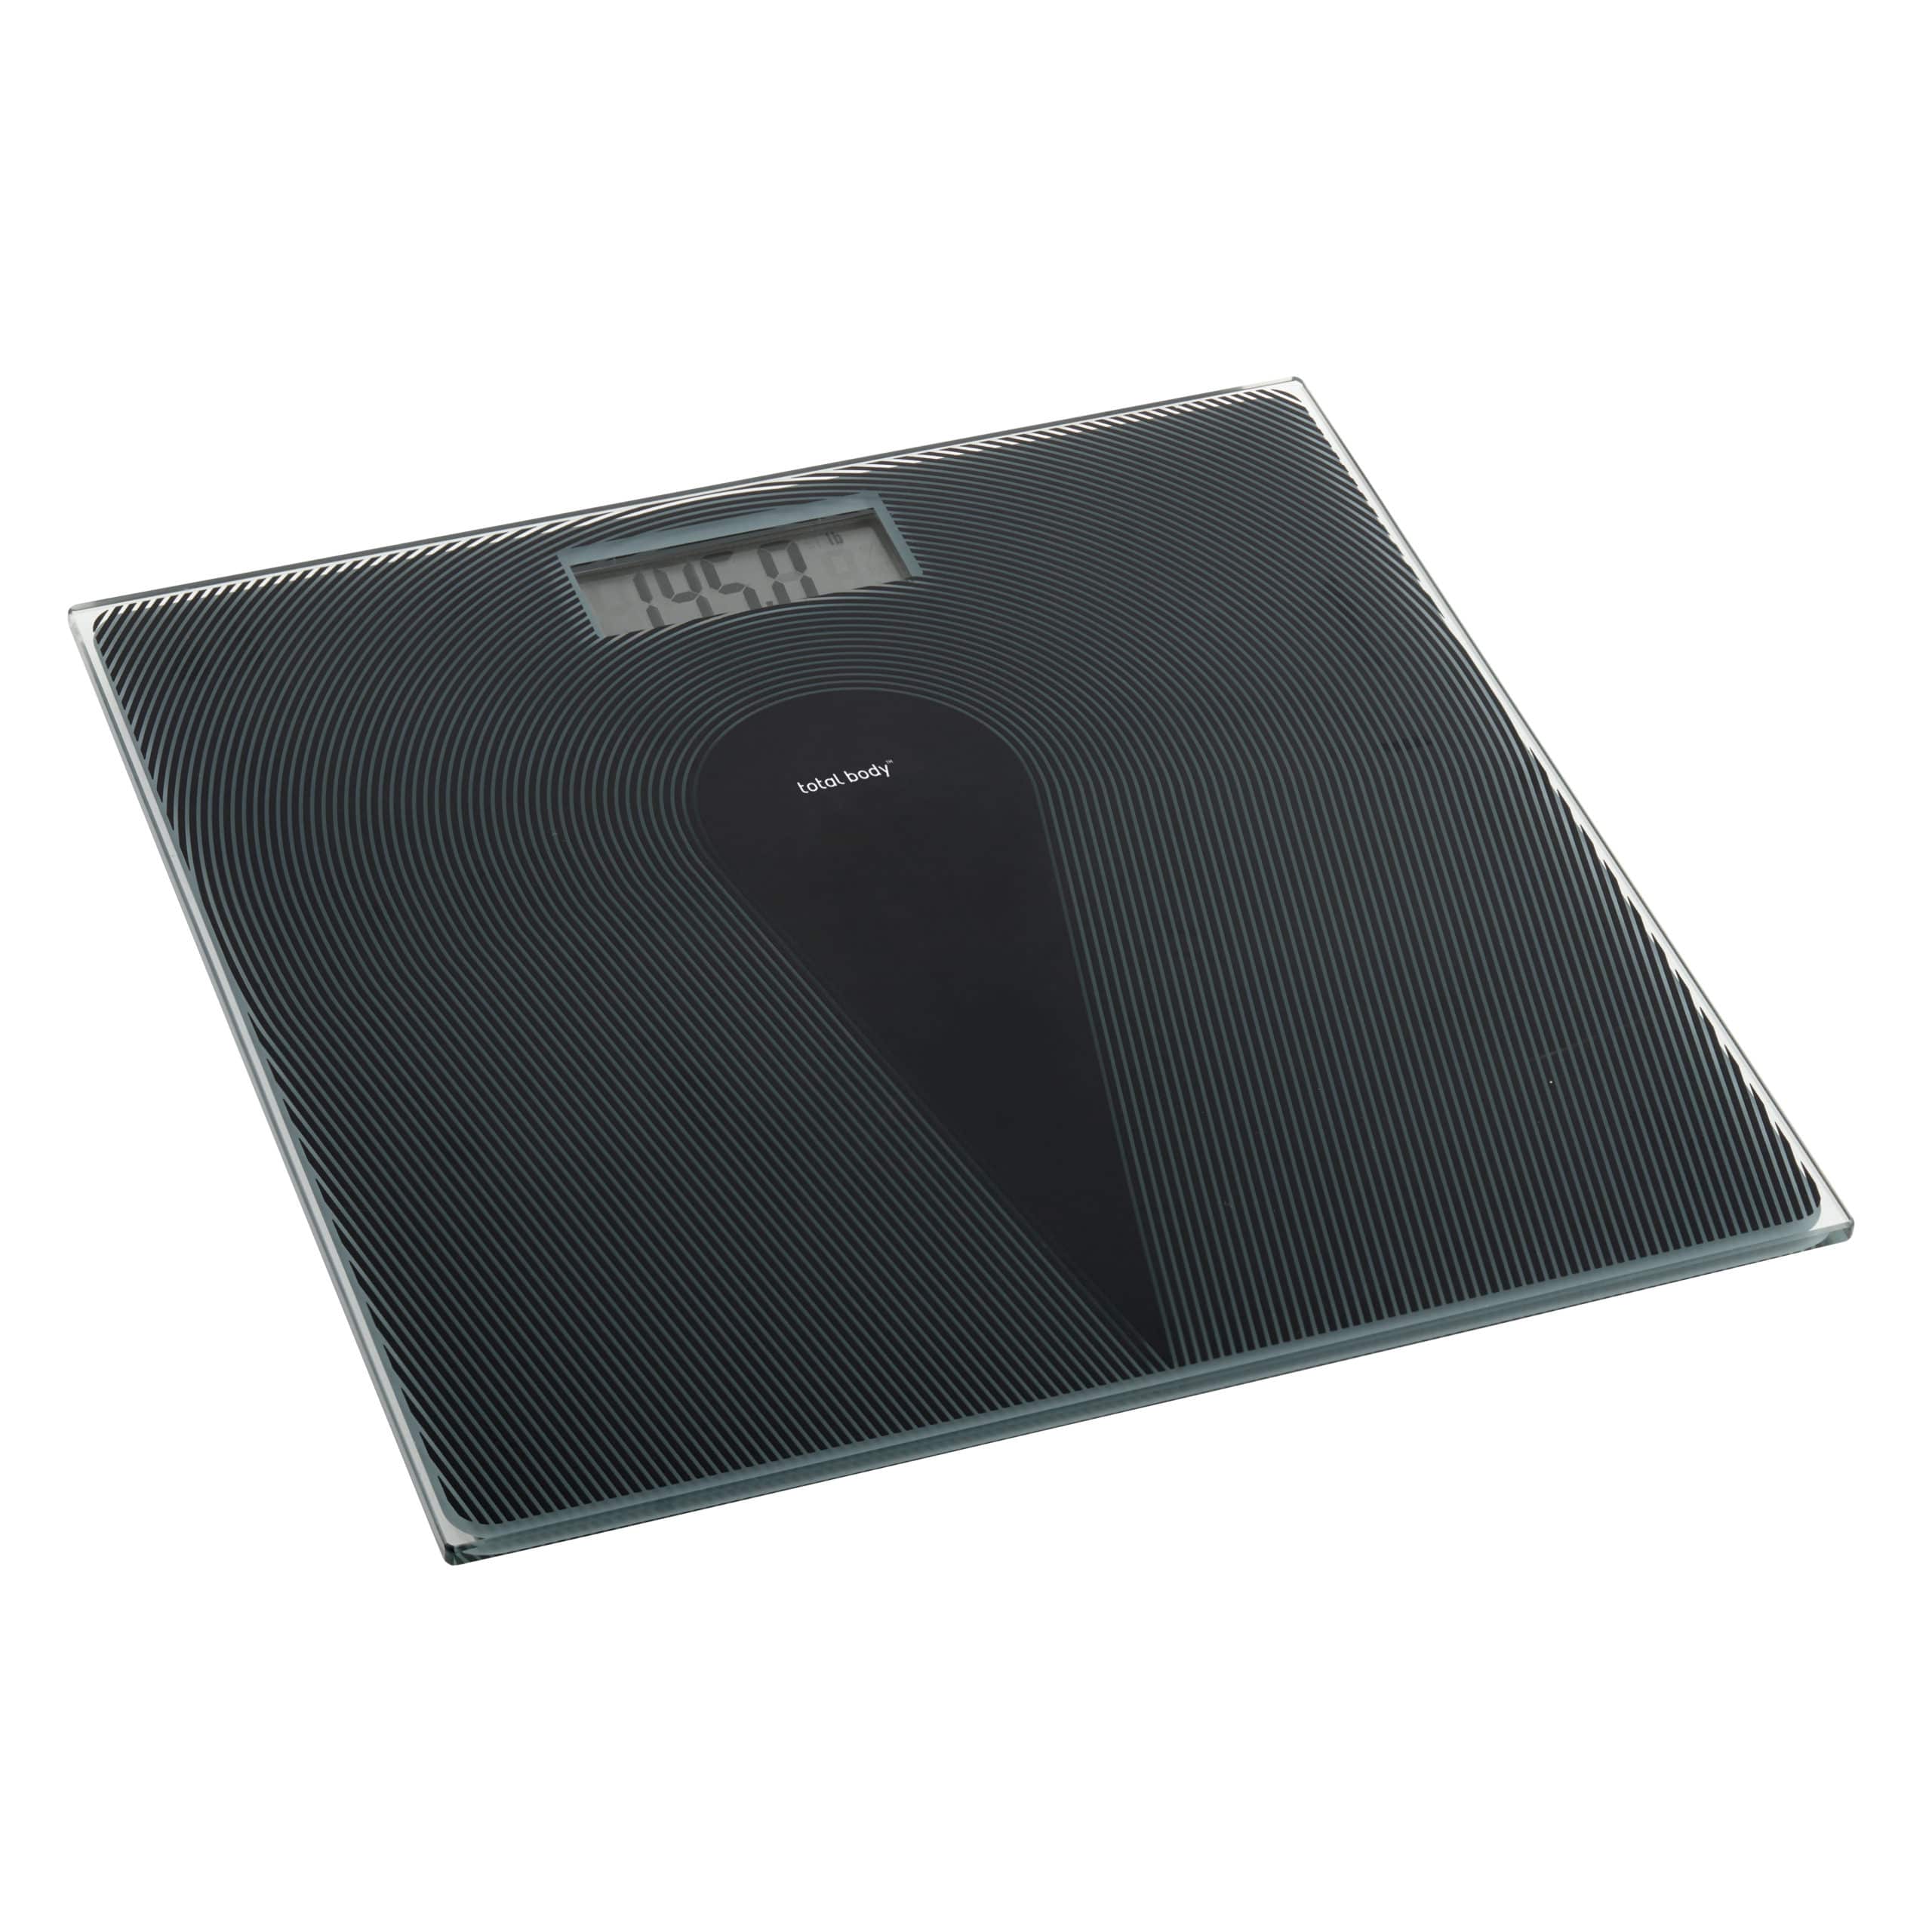 TOTAL BODY ELECTRONIC personal SCALE